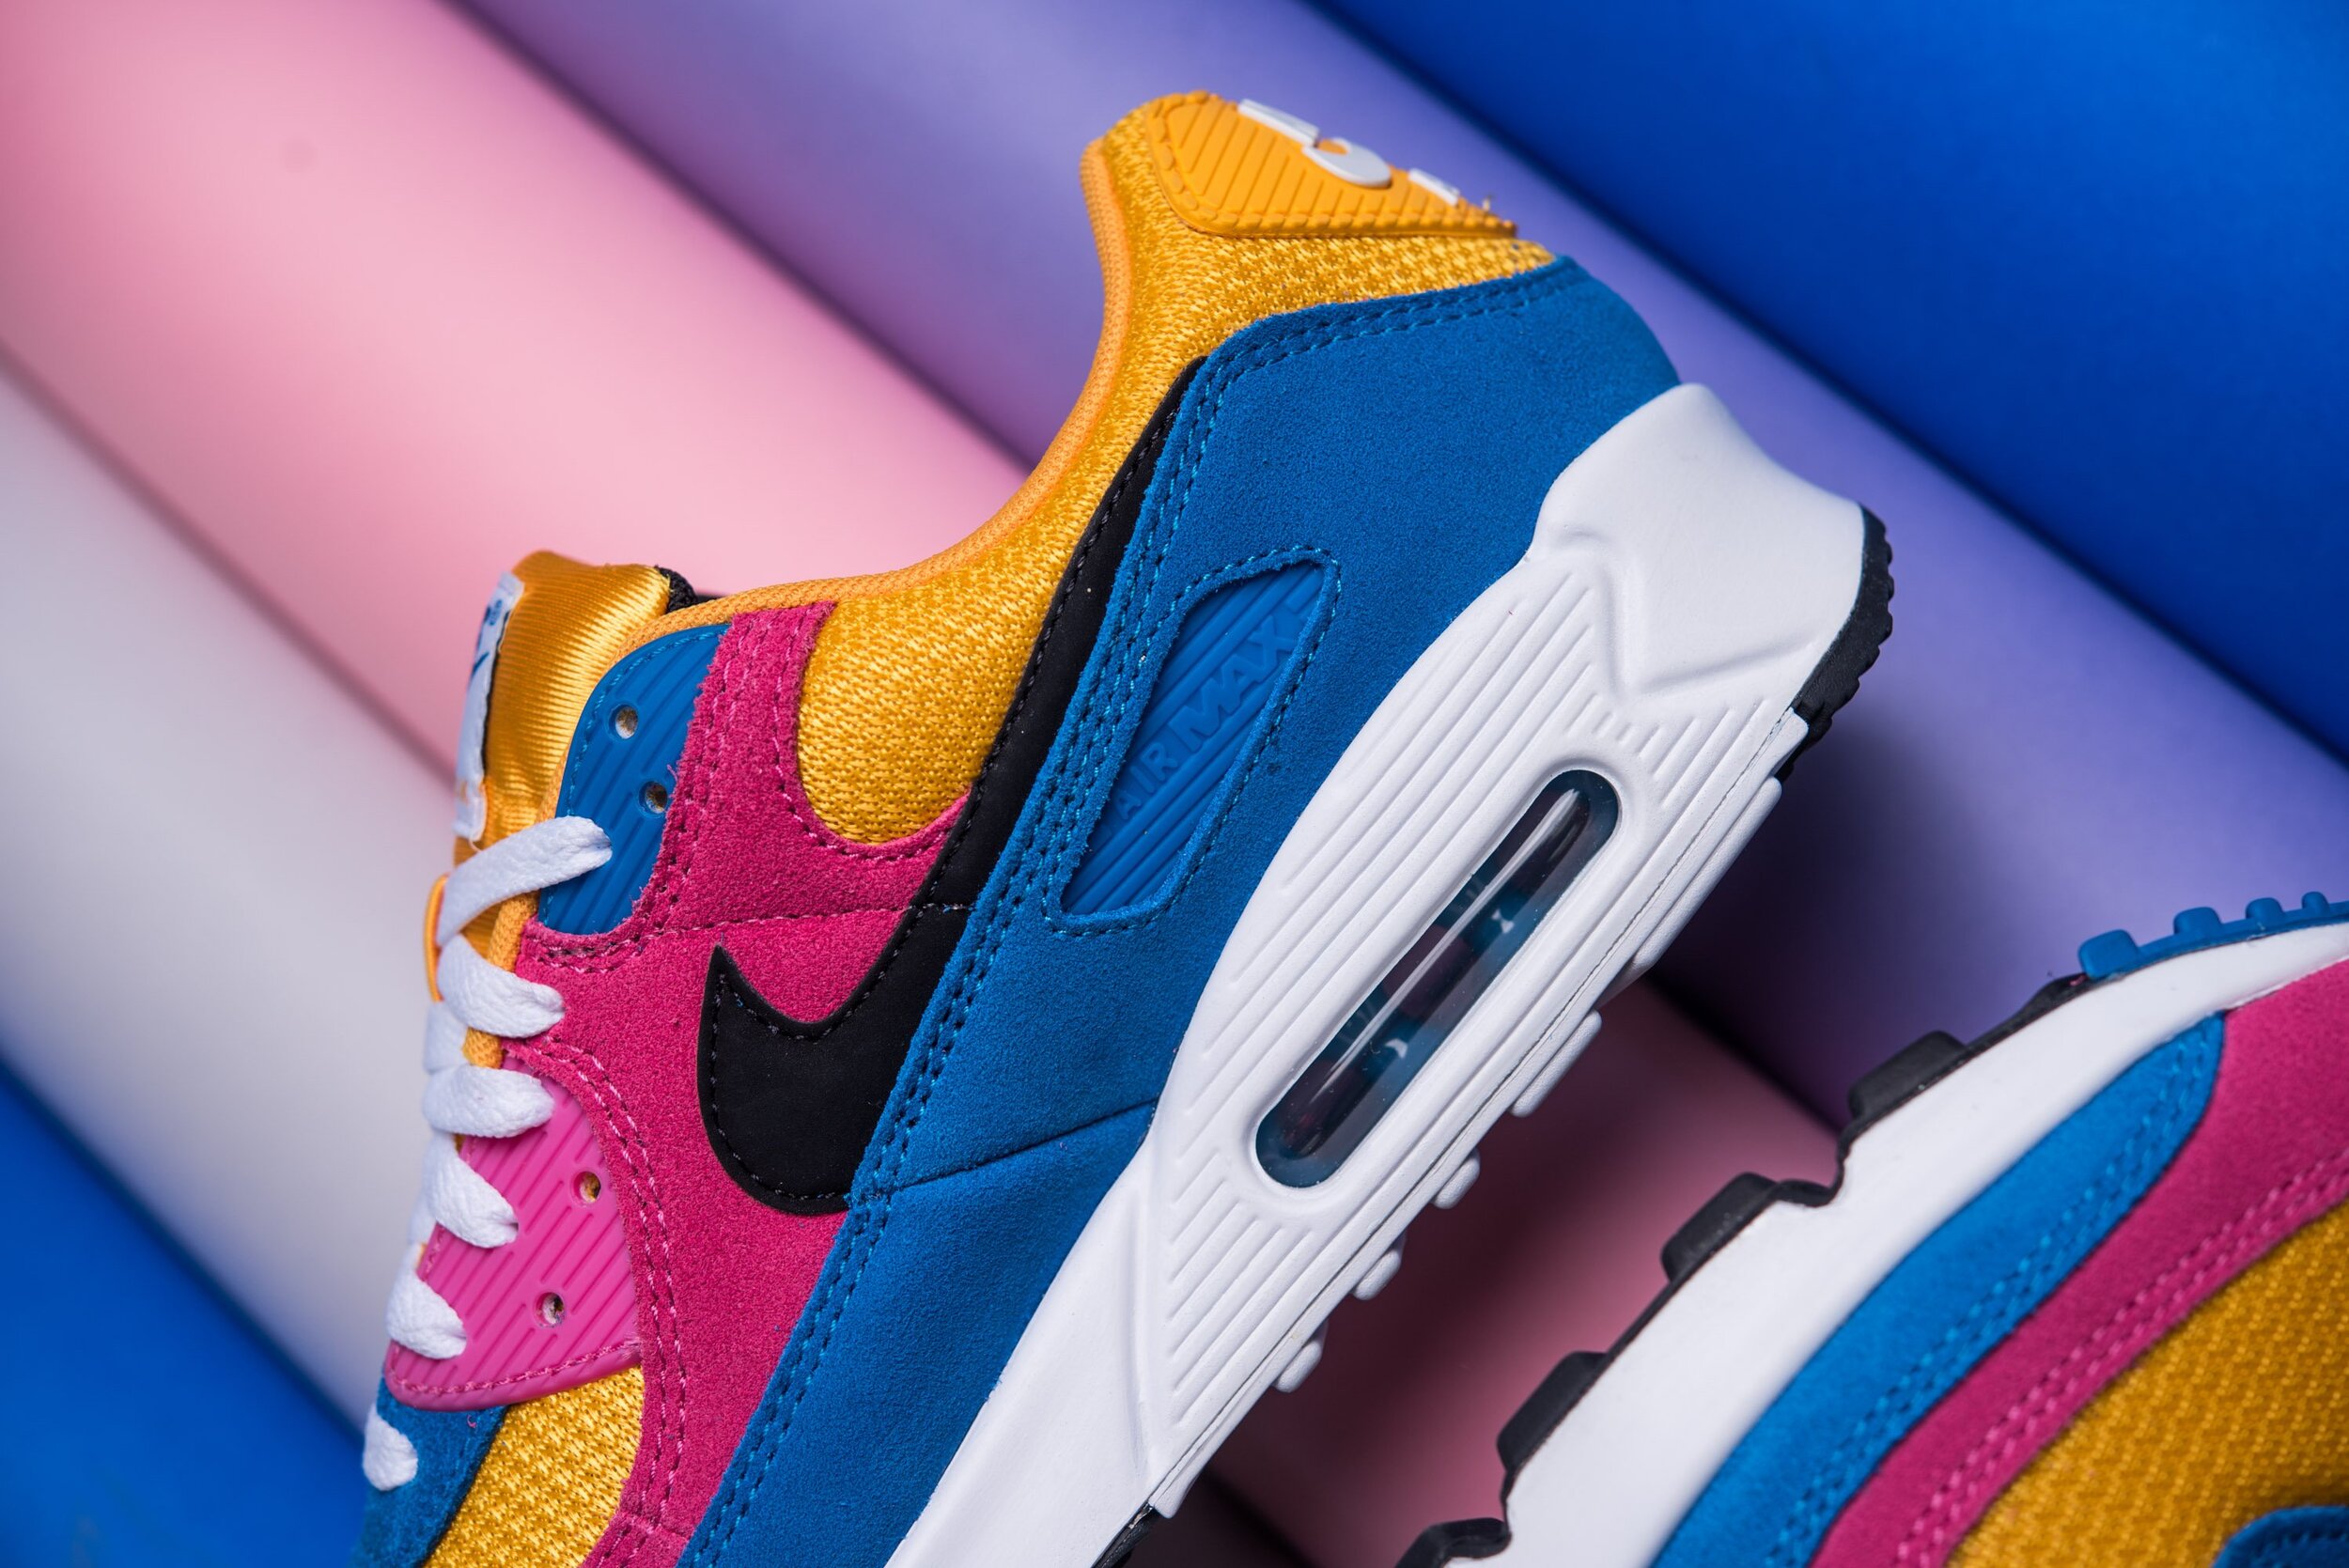 The Air Max 90 Channels the 90s 